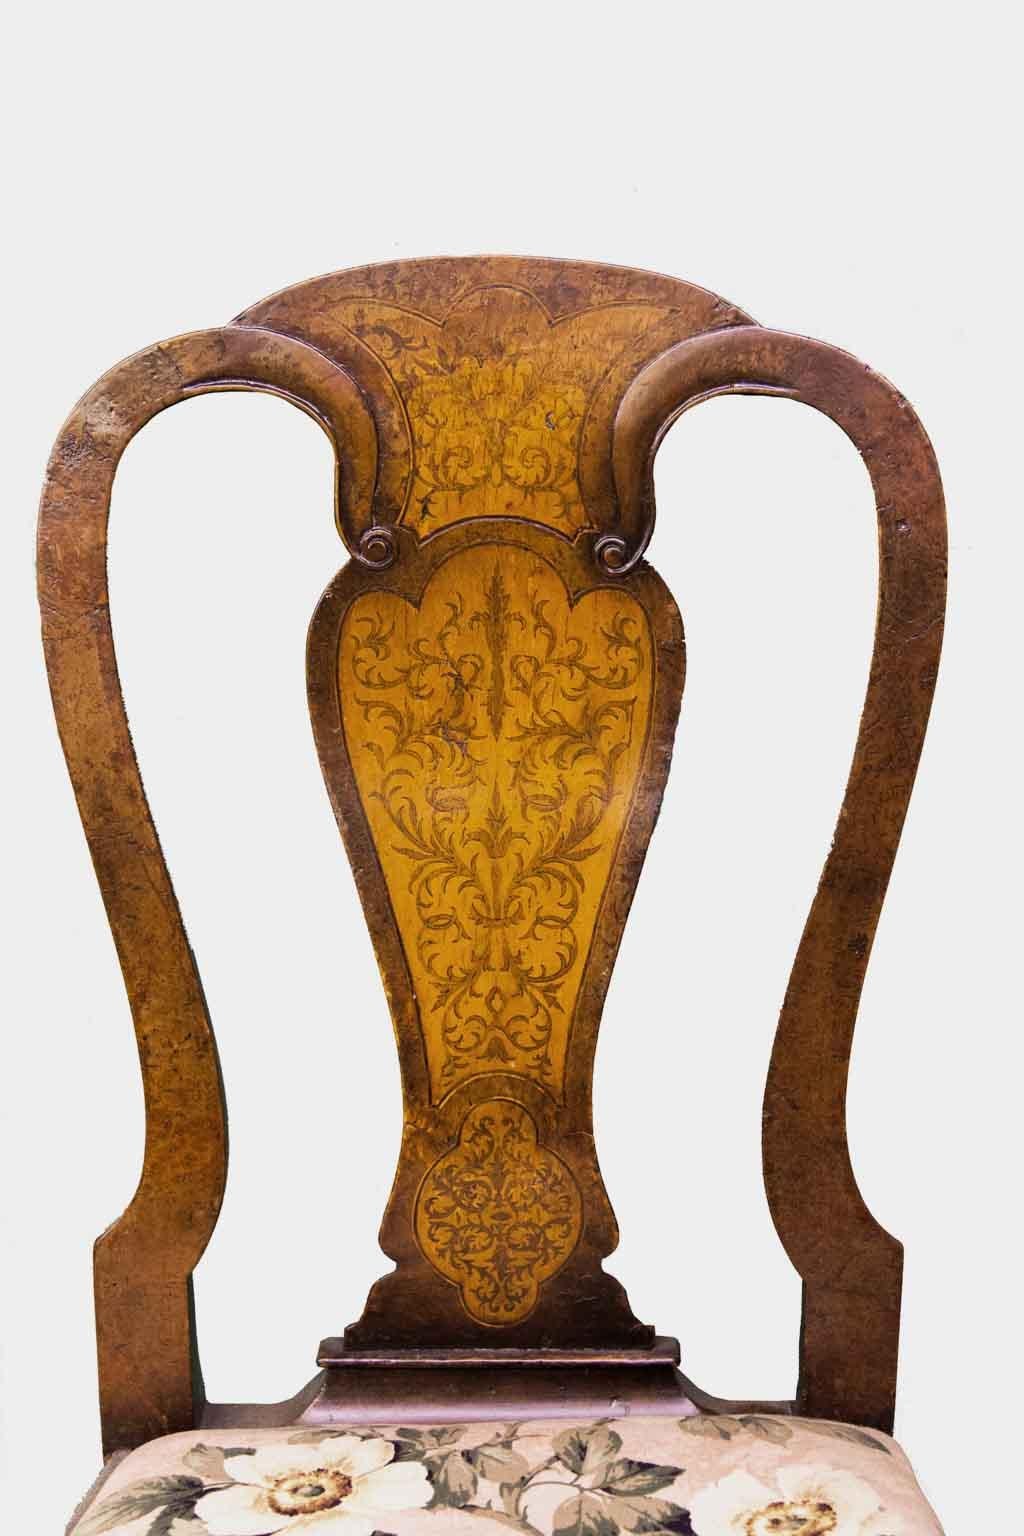 Inlaid seaweed marquetry Queen Anne side chair with scrolled drake feet and slip seat.